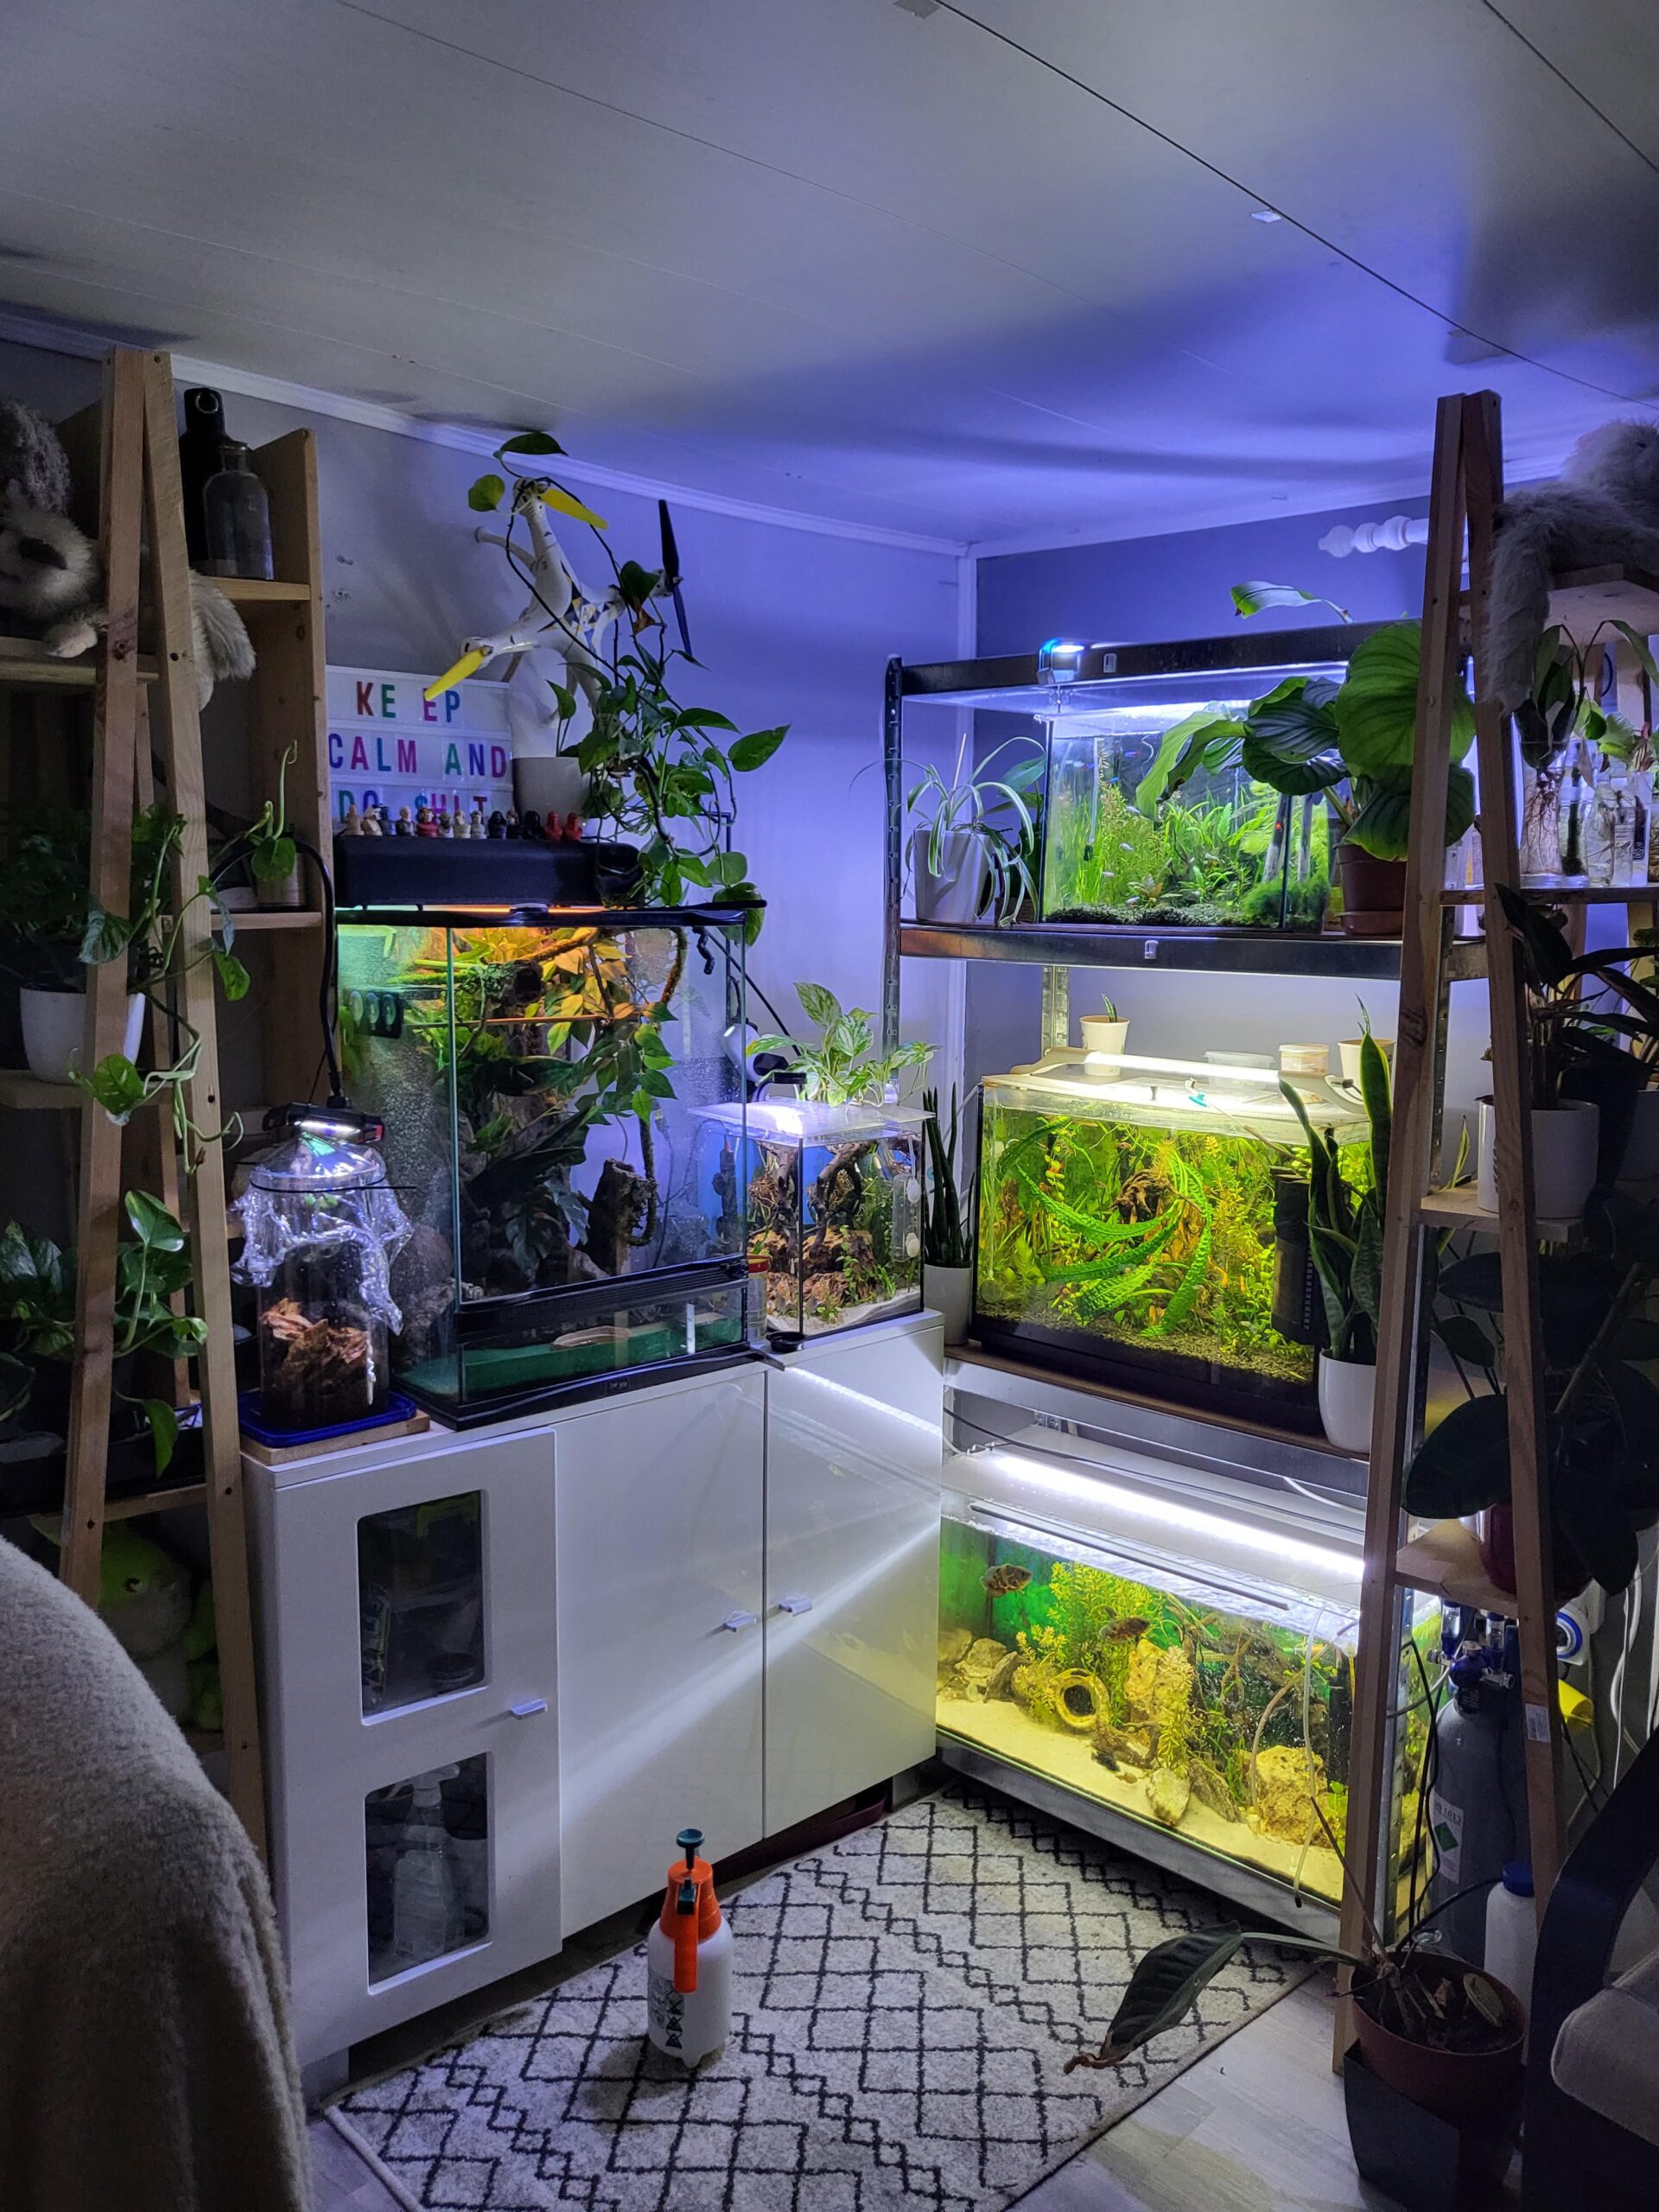 How to Hide Fish Tank from Landlord